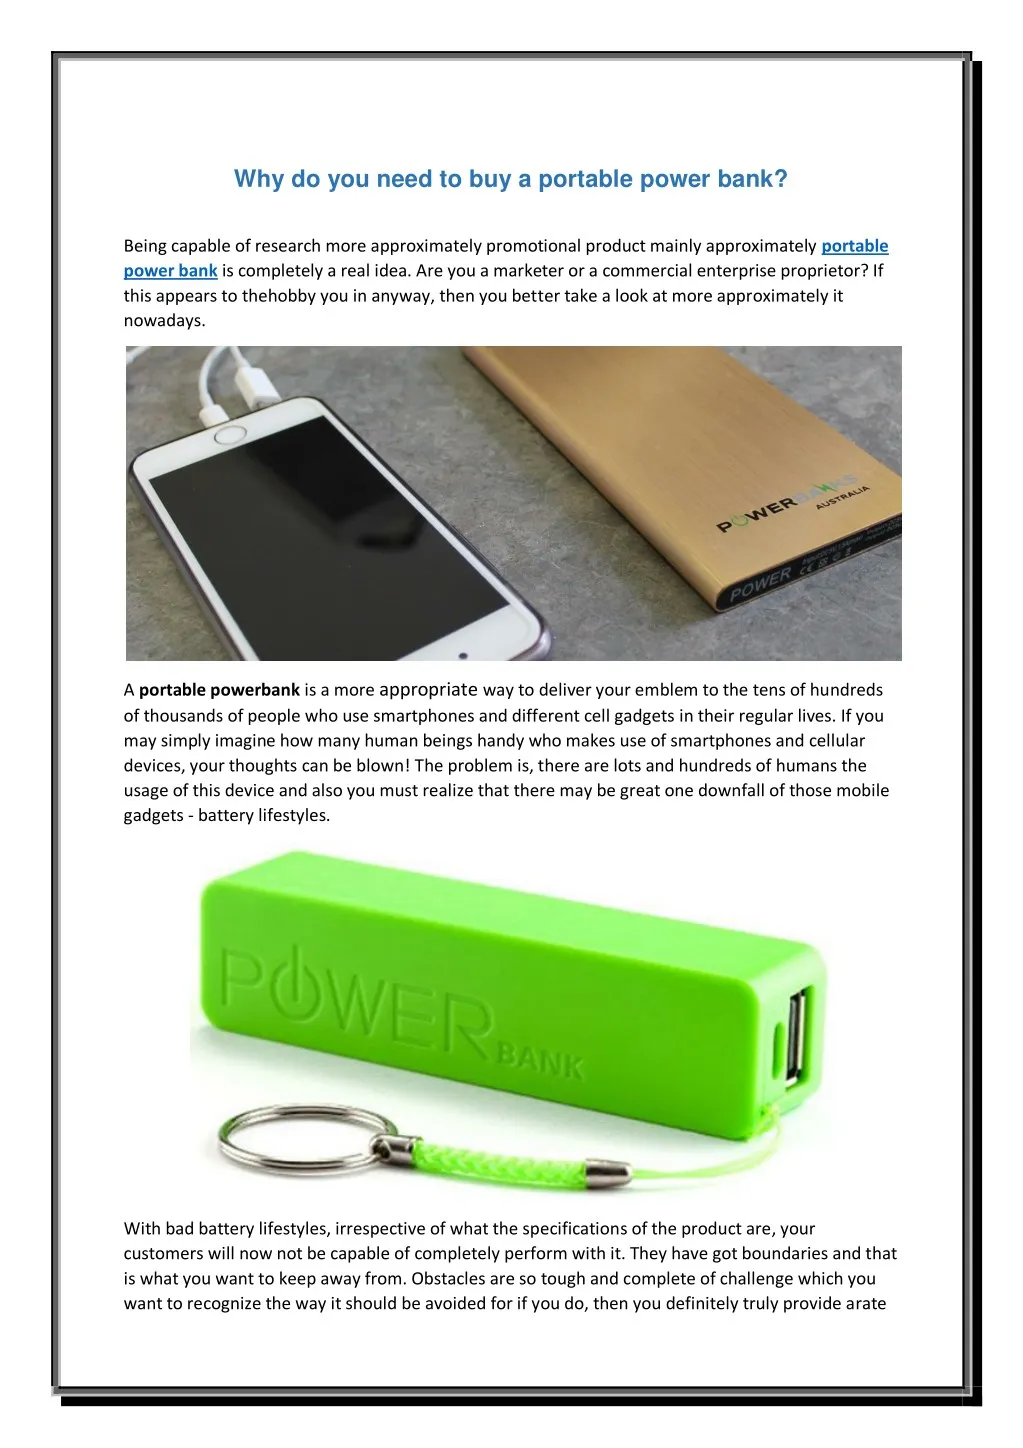 why do you need to buy a portable power bank